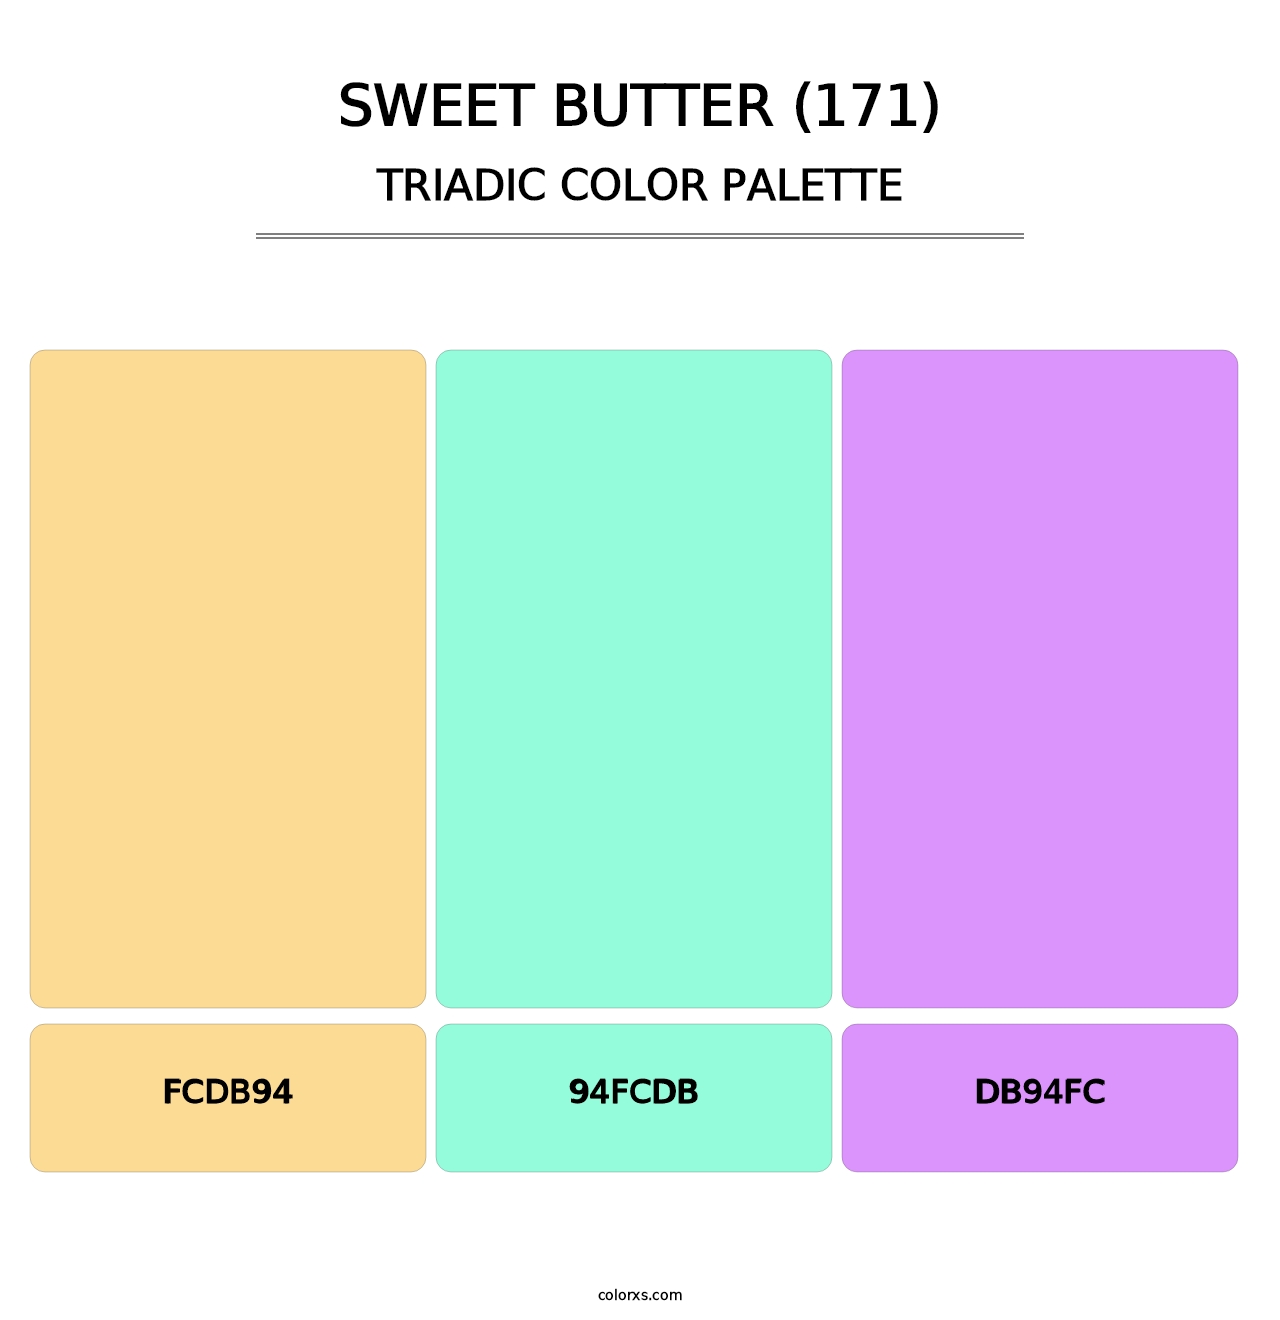 Sweet Butter (171) - Triadic Color Palette